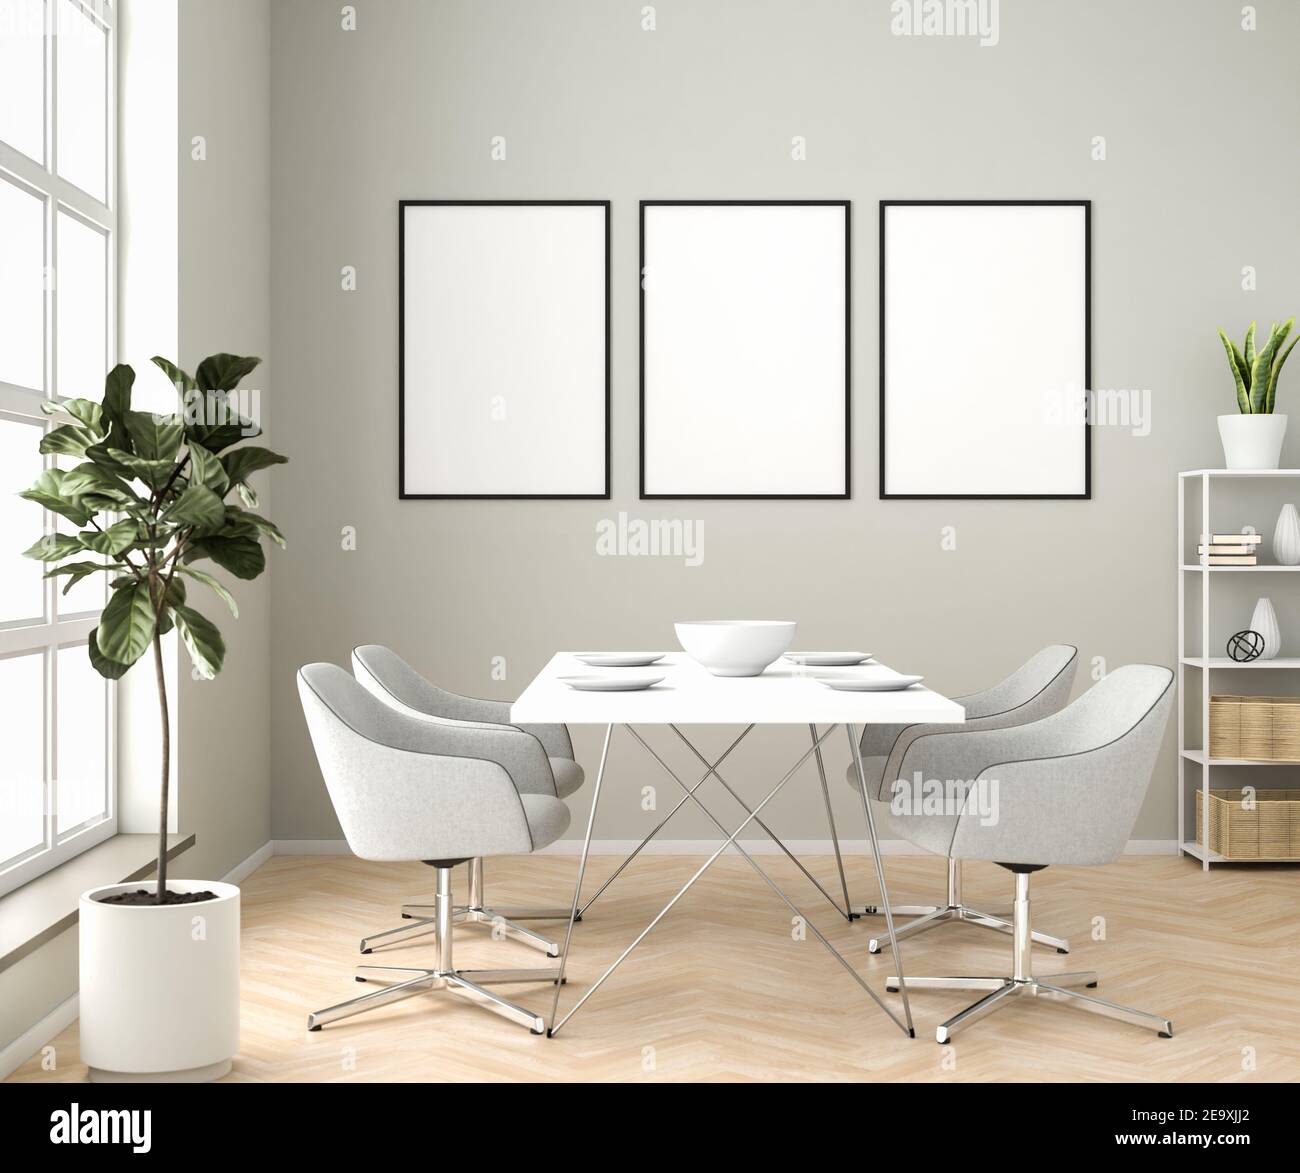 Interior setting with dining area and three blank picture frame mockups. Stock Photo